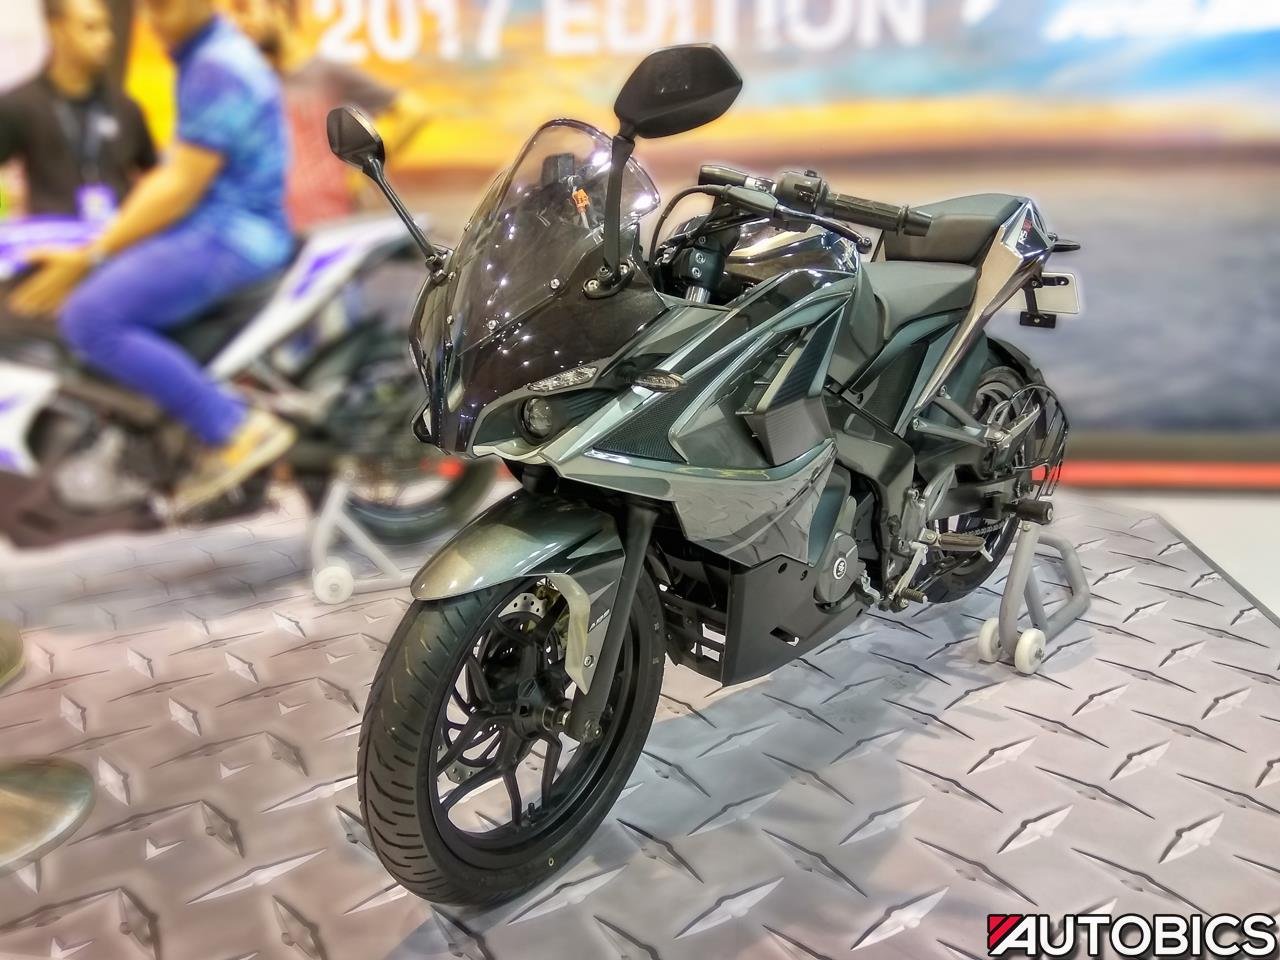 17 Bajaj Pulsar Rs0 Launched In India Prices Start At Rs 1 21 1 Autobics